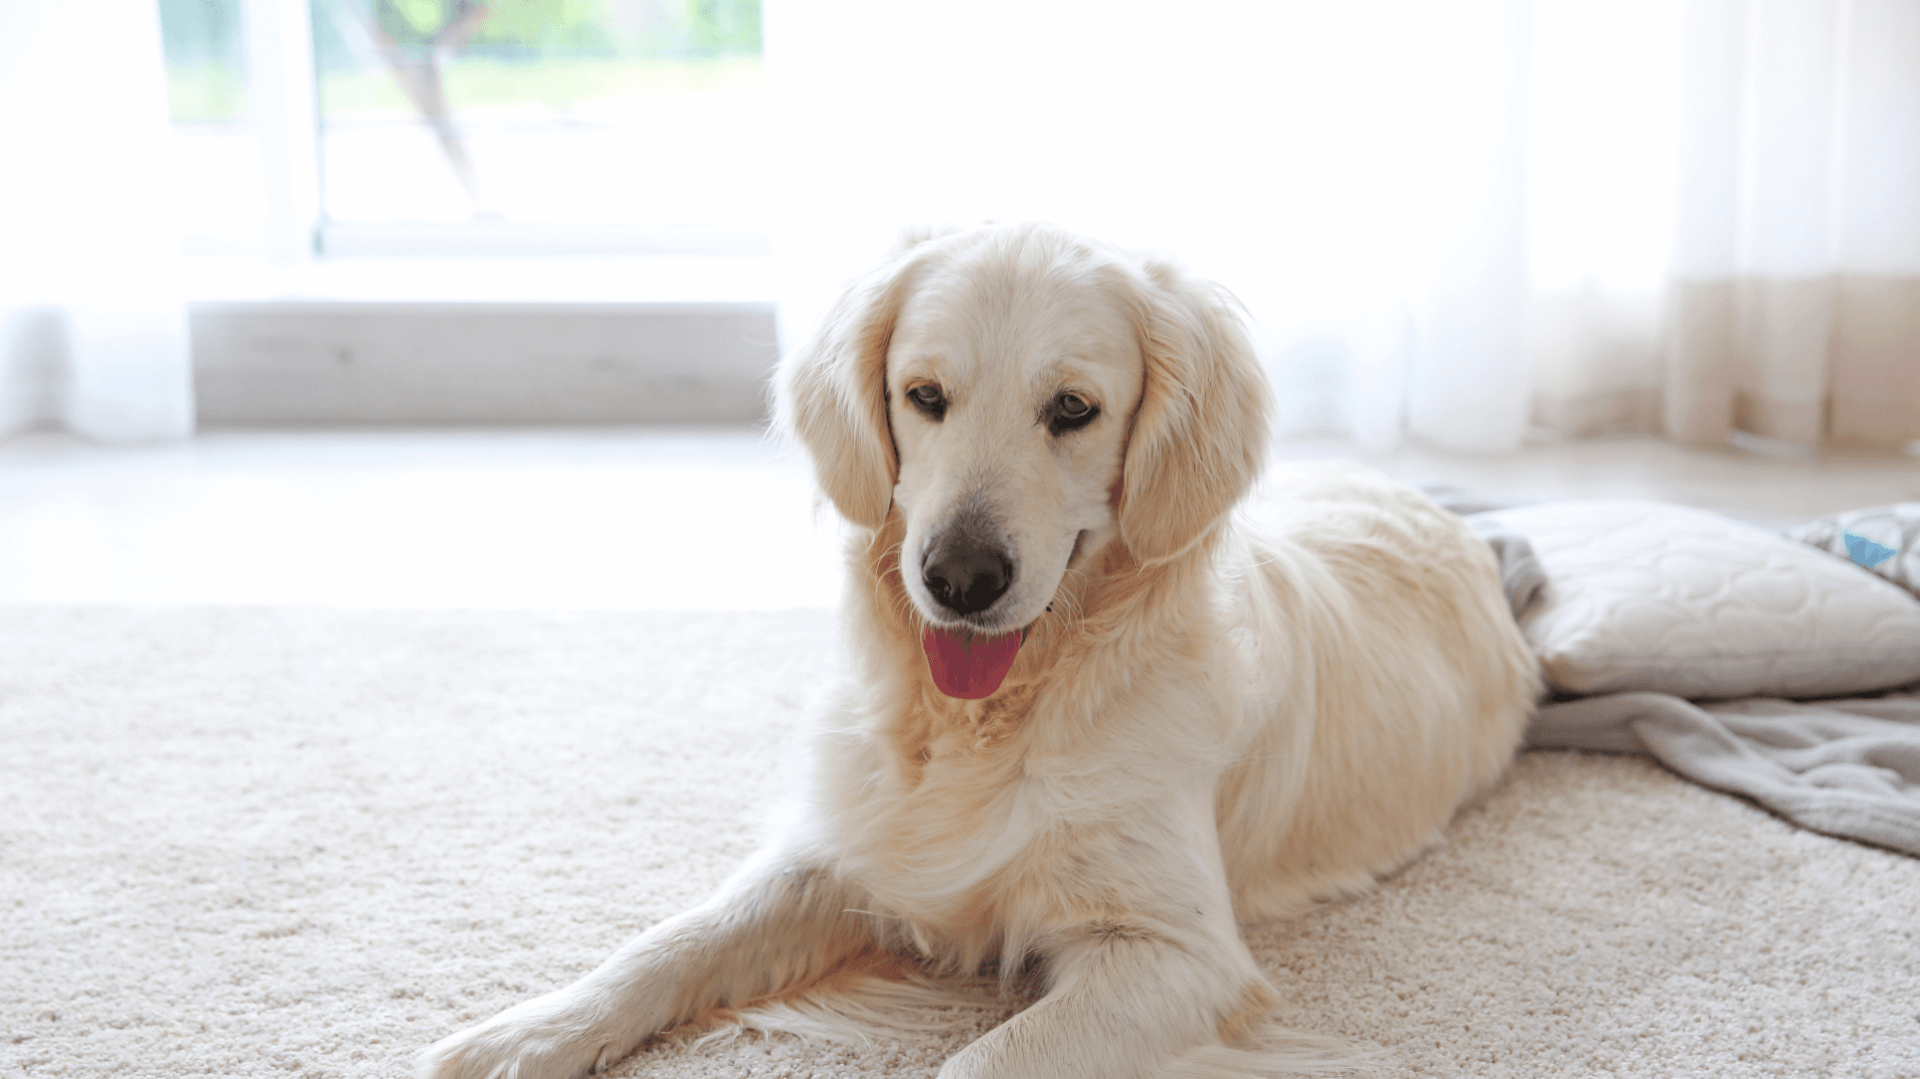 Remove Pet Stains and Hair From Your Carpet